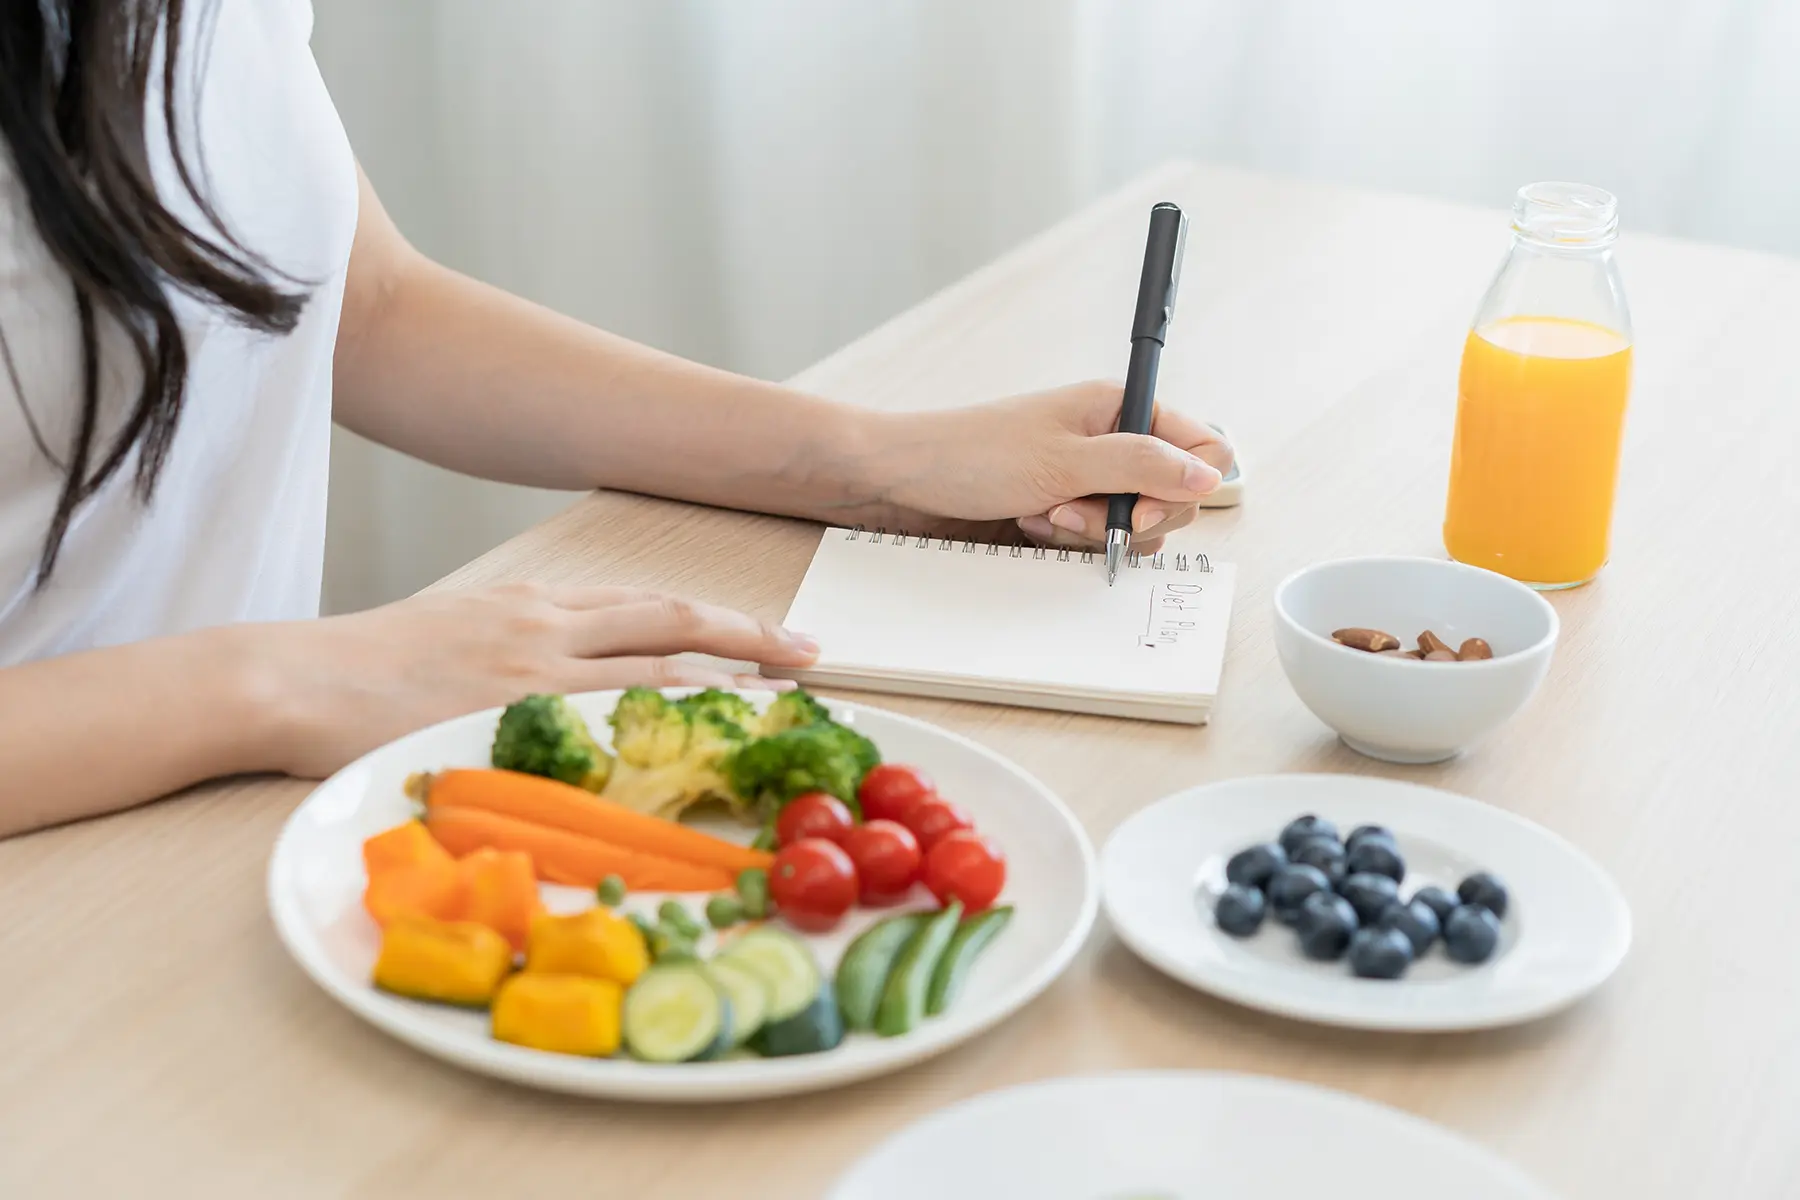 Weight loss diet plan: Eating healthy food regularly can help shed